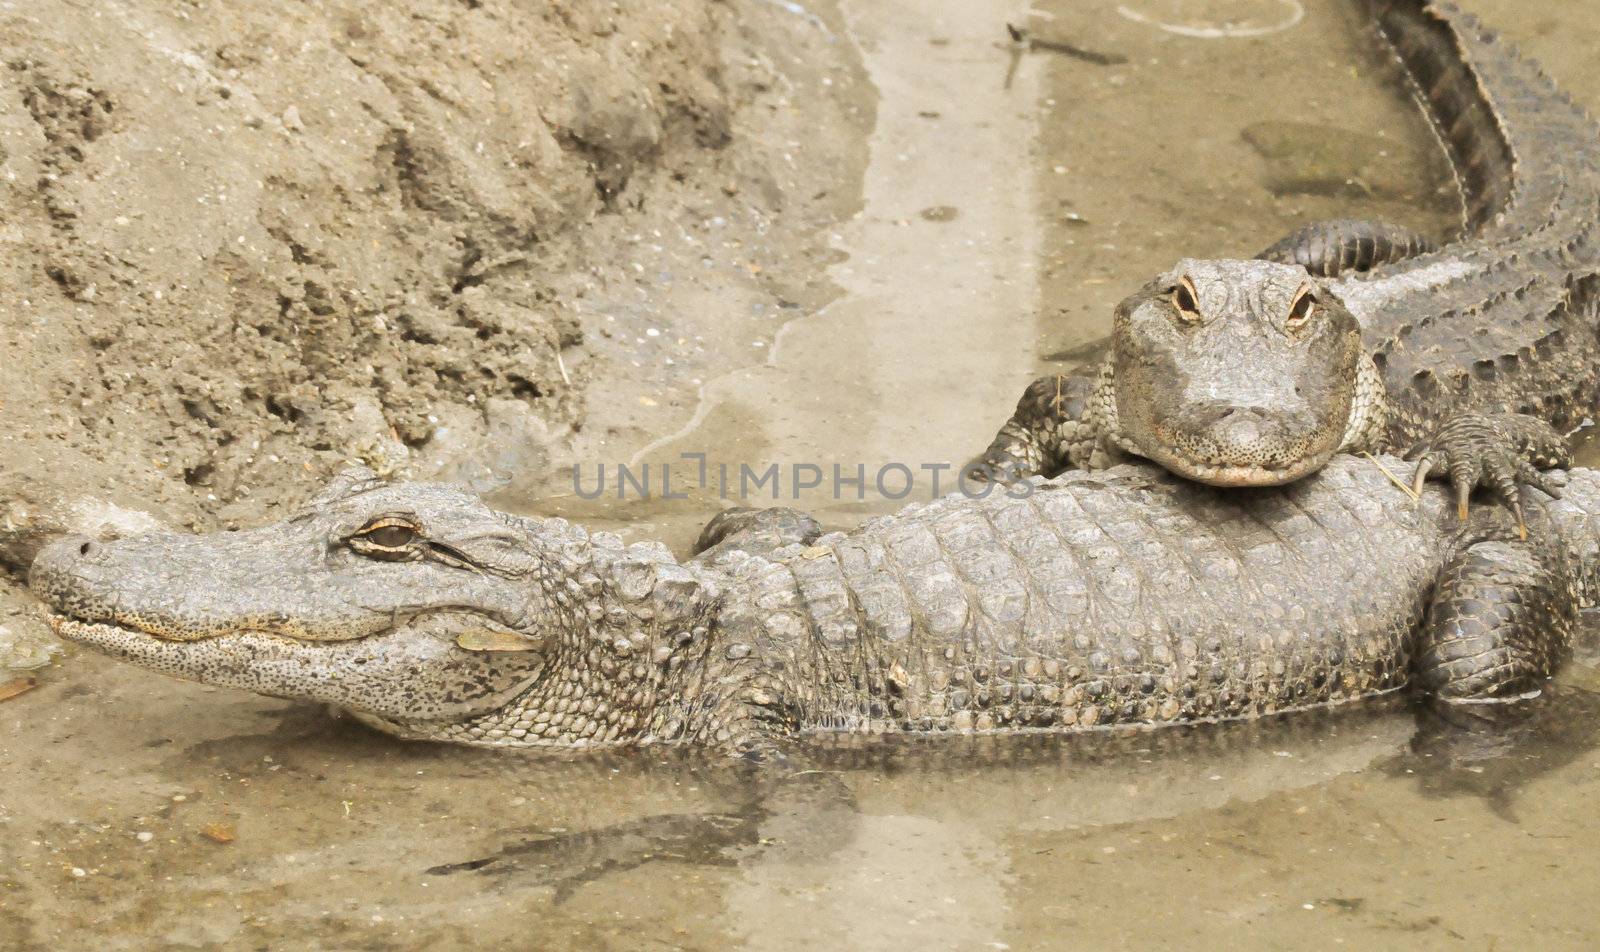 Two Alligators in the water by RefocusPhoto